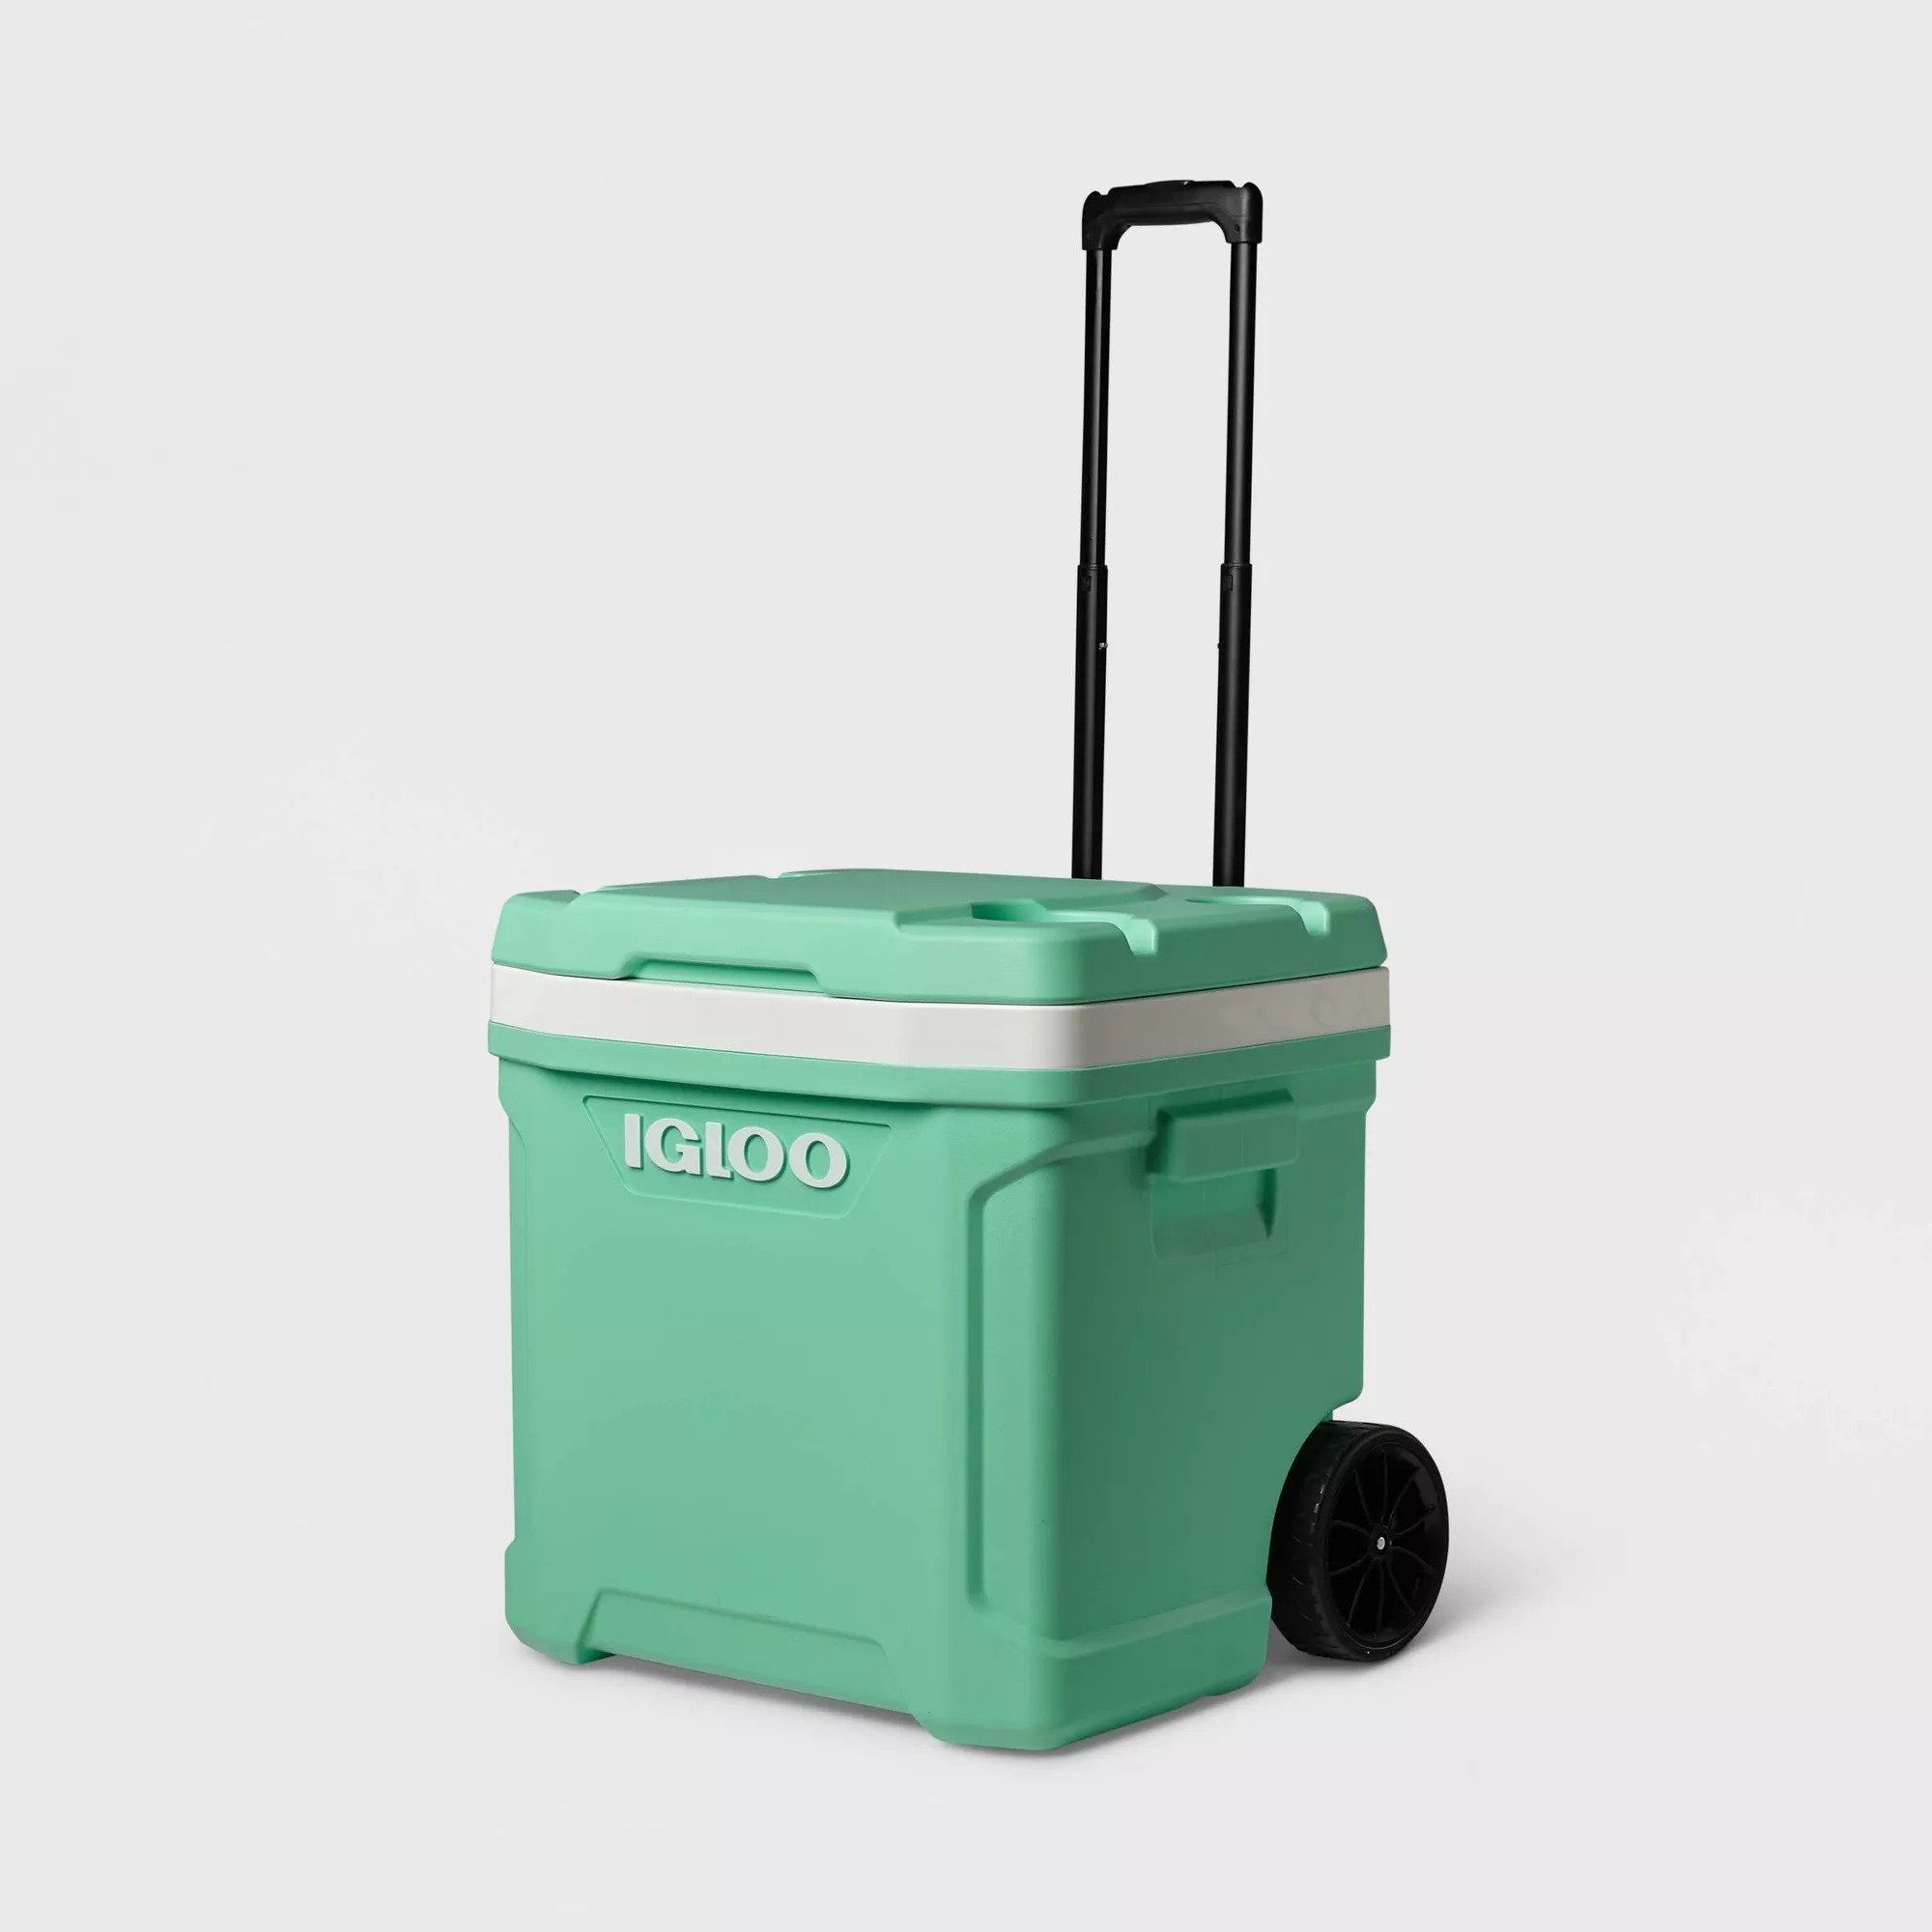 The cooler in mint green